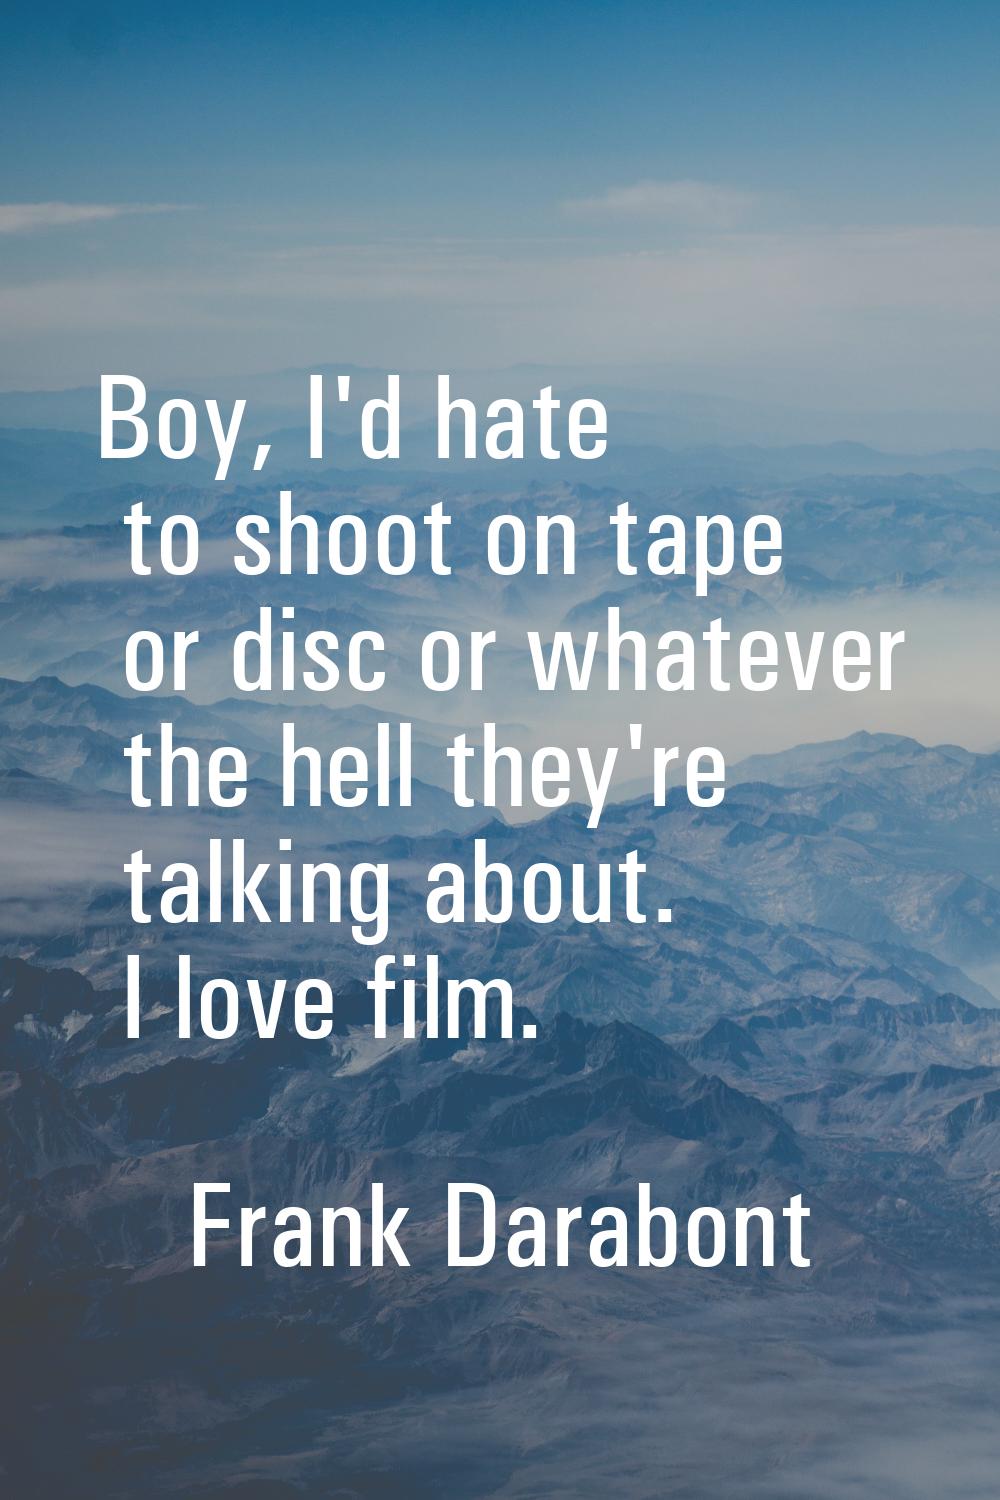 Boy, I'd hate to shoot on tape or disc or whatever the hell they're talking about. I love film.